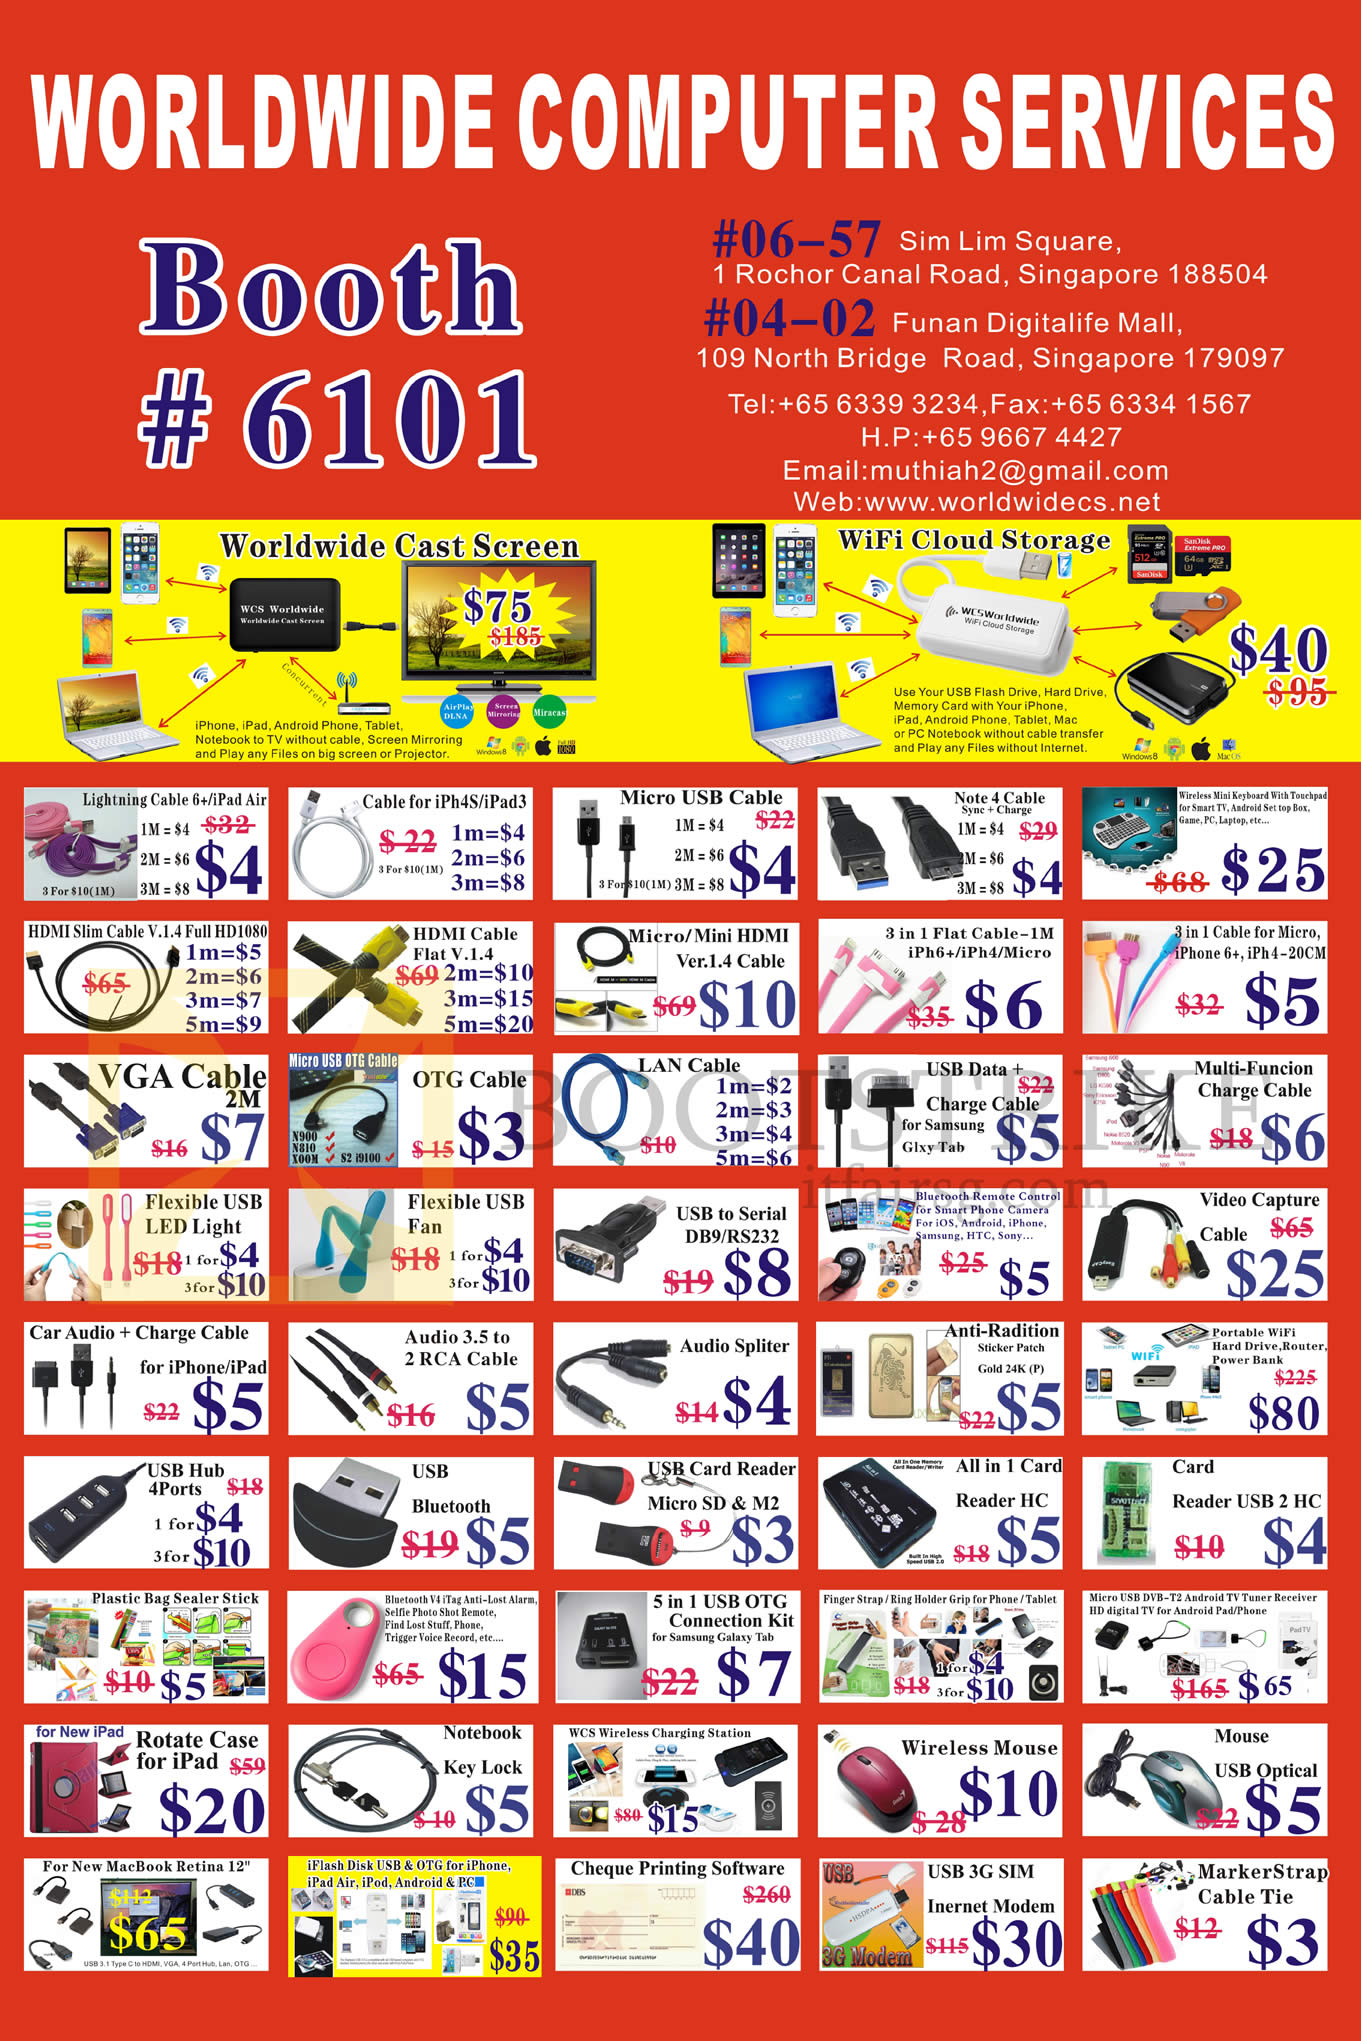 IT SHOW 2016 price list image brochure of Worldwide Computer Accessories Cable, Case, USB, Fan, LED Light, Adapter, Mouse, 3G Modem